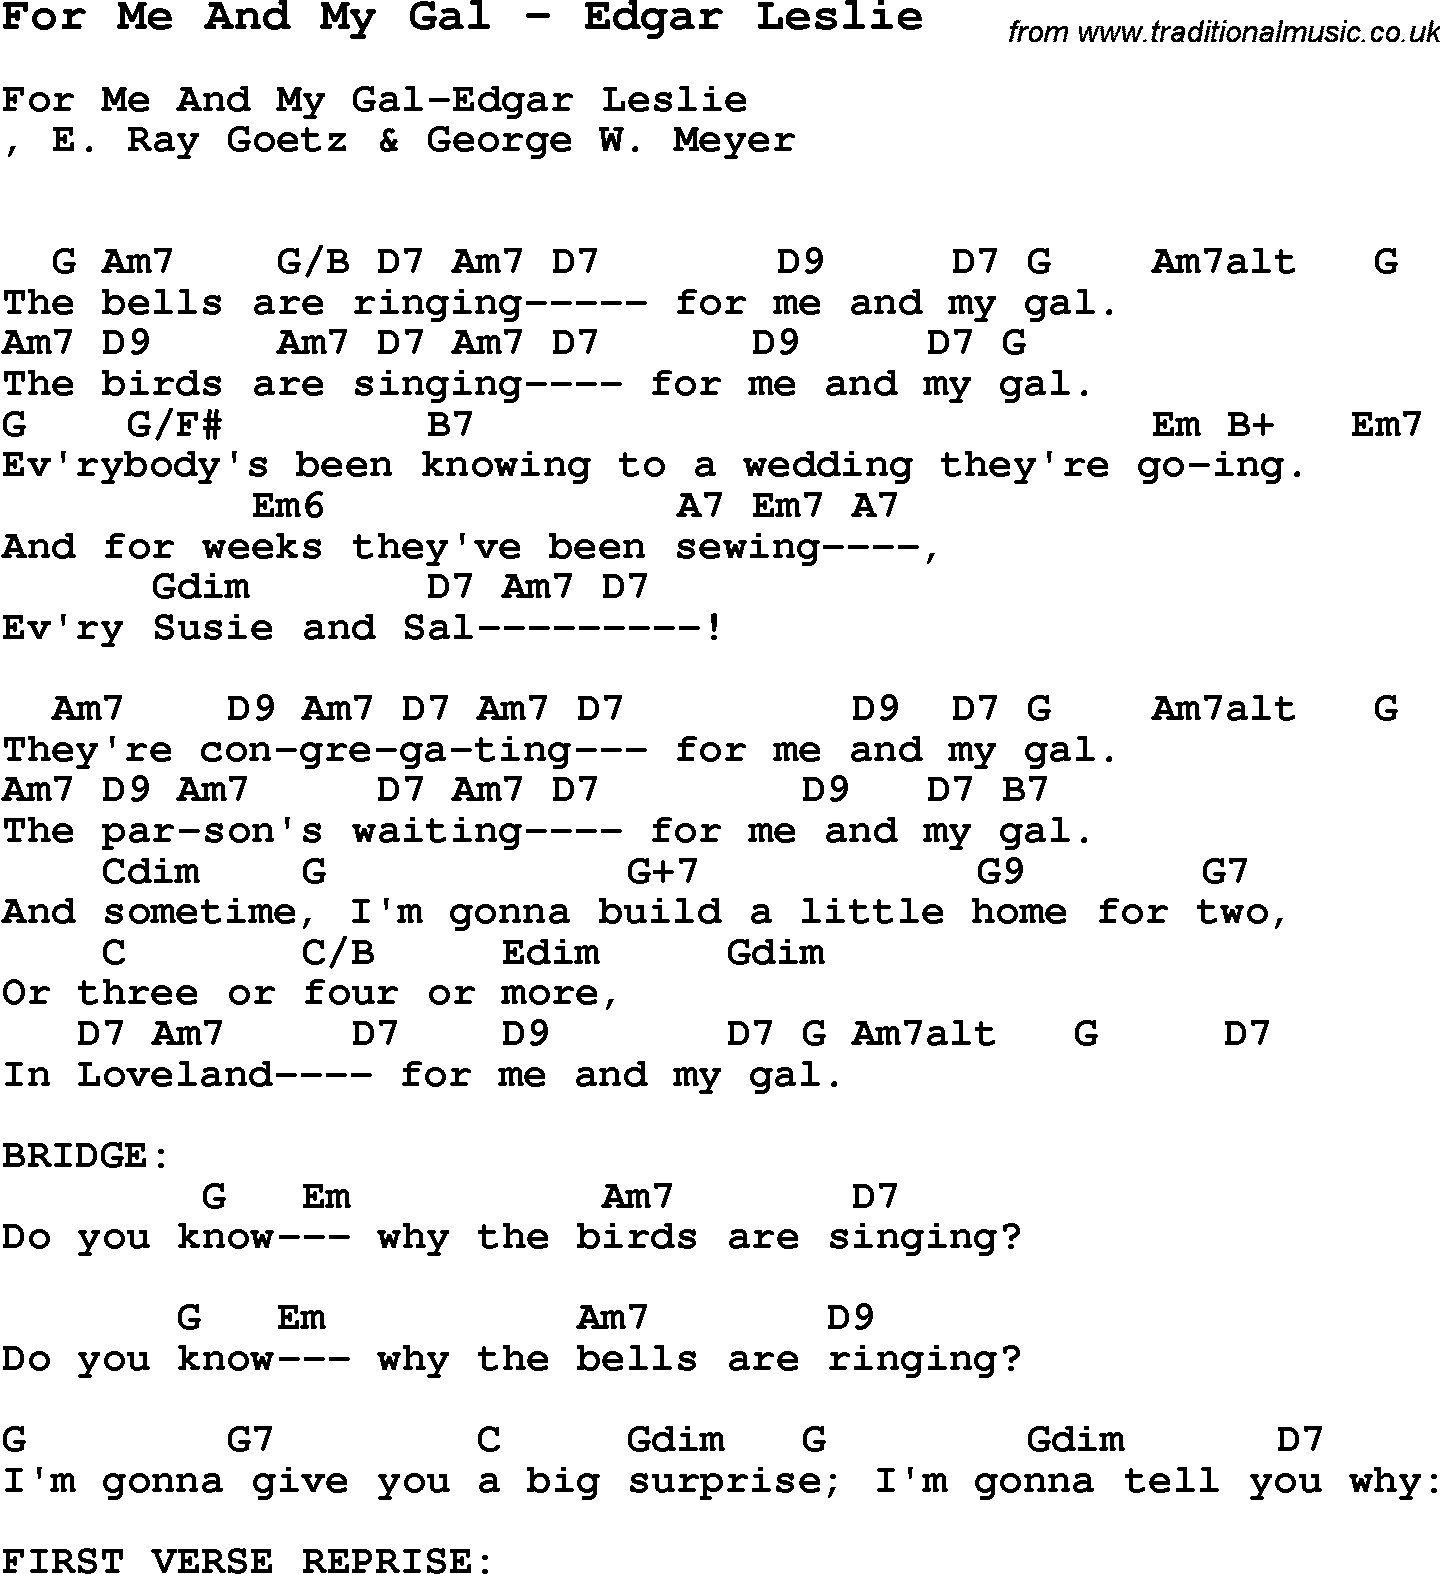 Song For Me And My Gal by Edgar Leslie, with lyrics for vocal performance and accompaniment chords for Ukulele, Guitar Banjo etc.